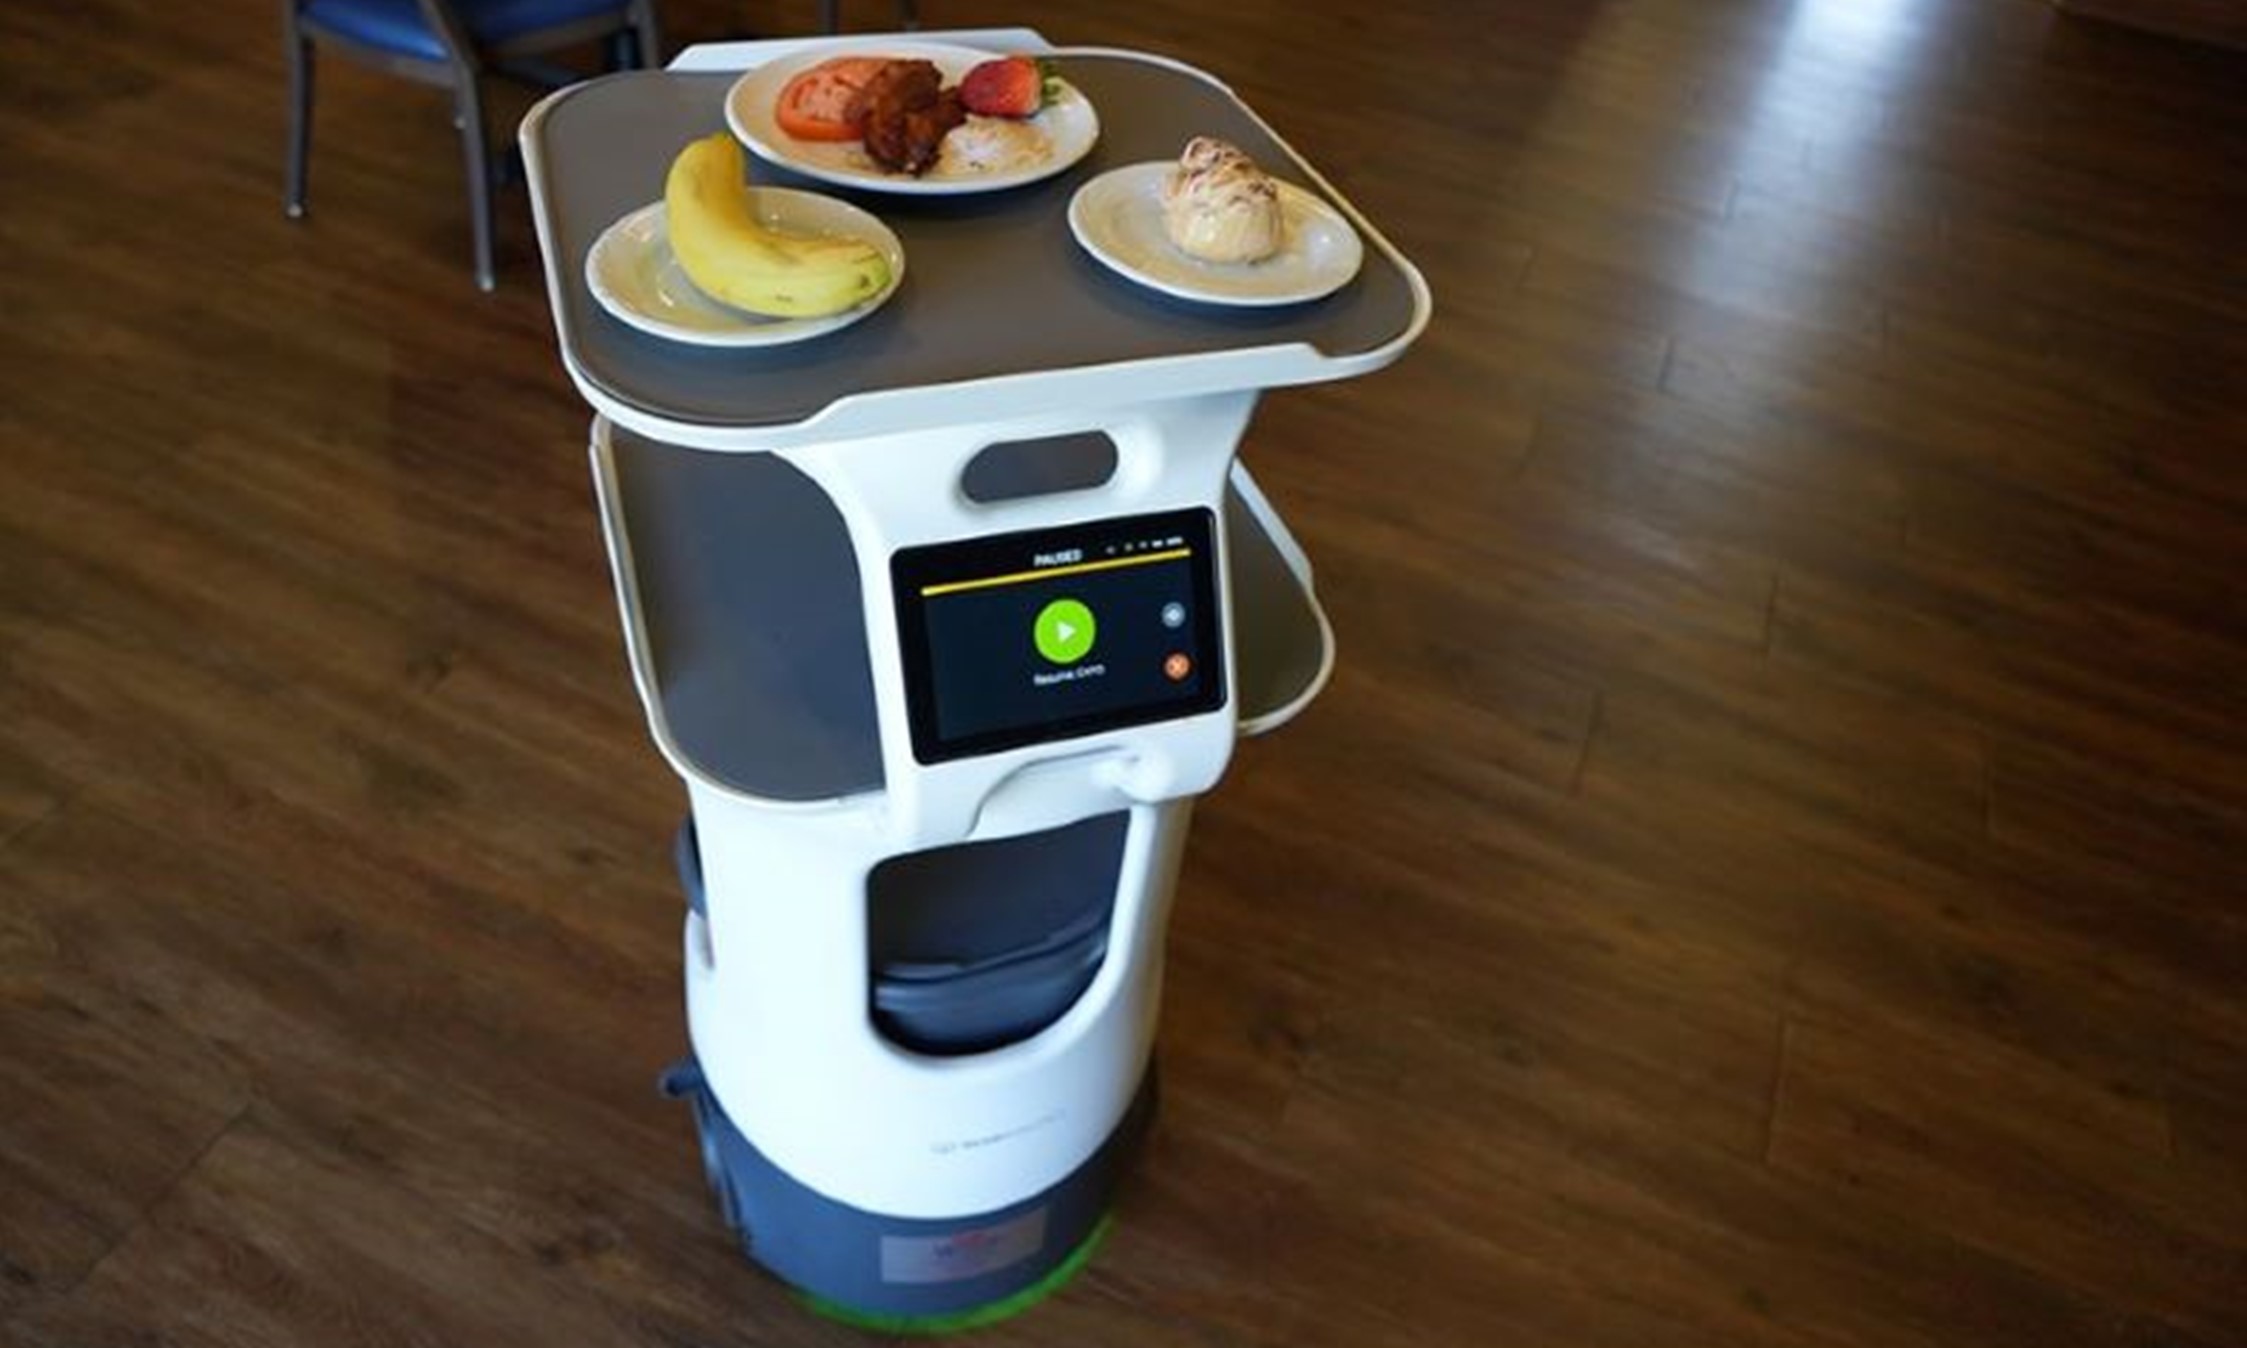 Robots enhance services at assisted living homes